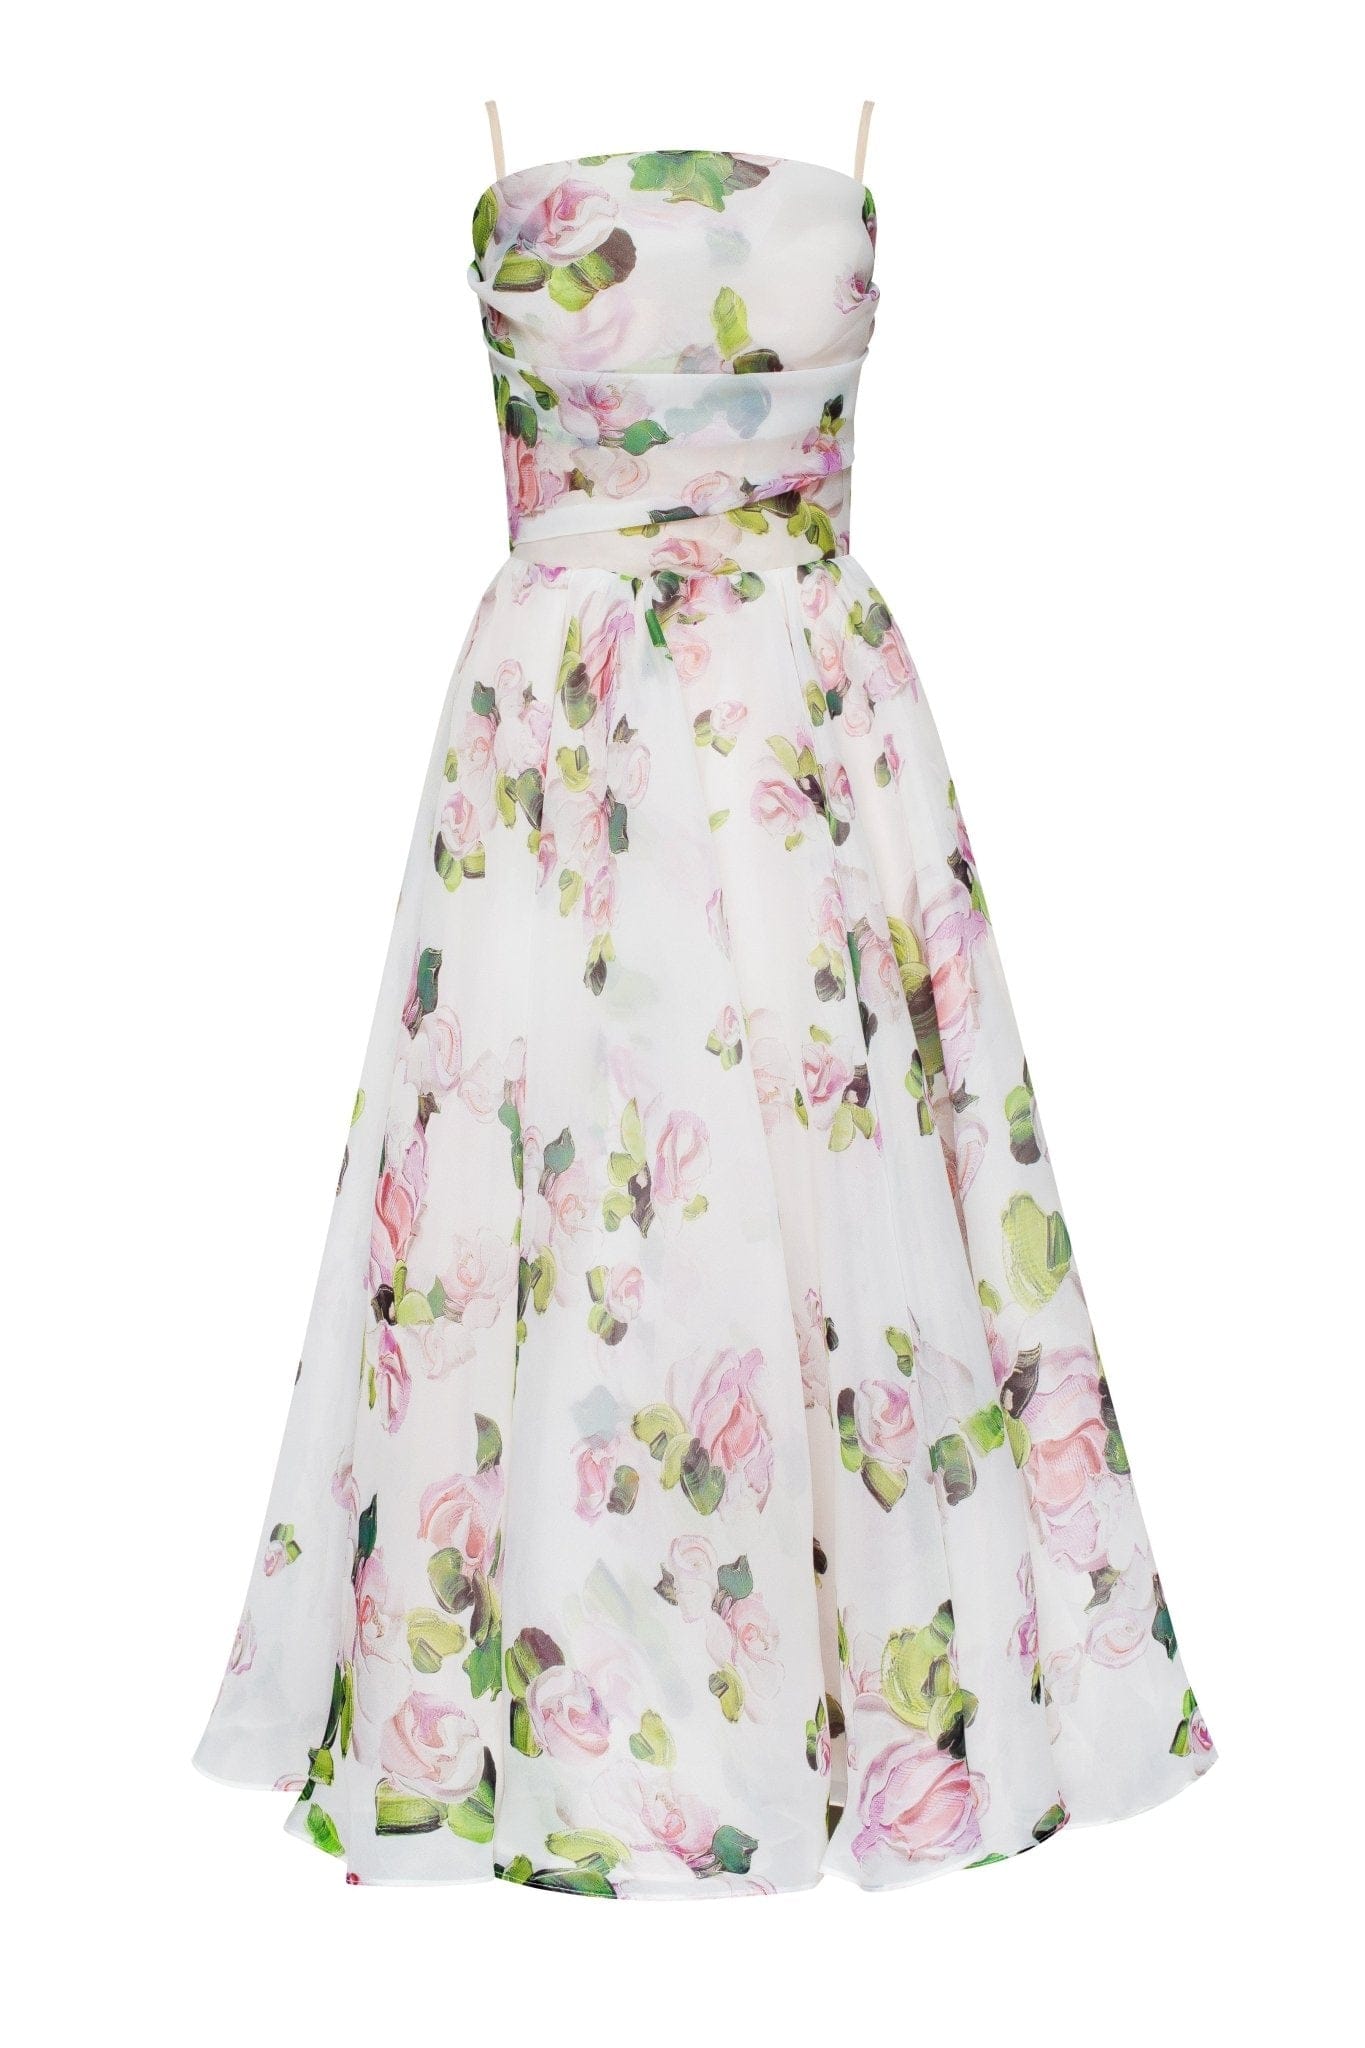 Floral Dresses ➤ Milla Dresses - USA, Worldwide delivery